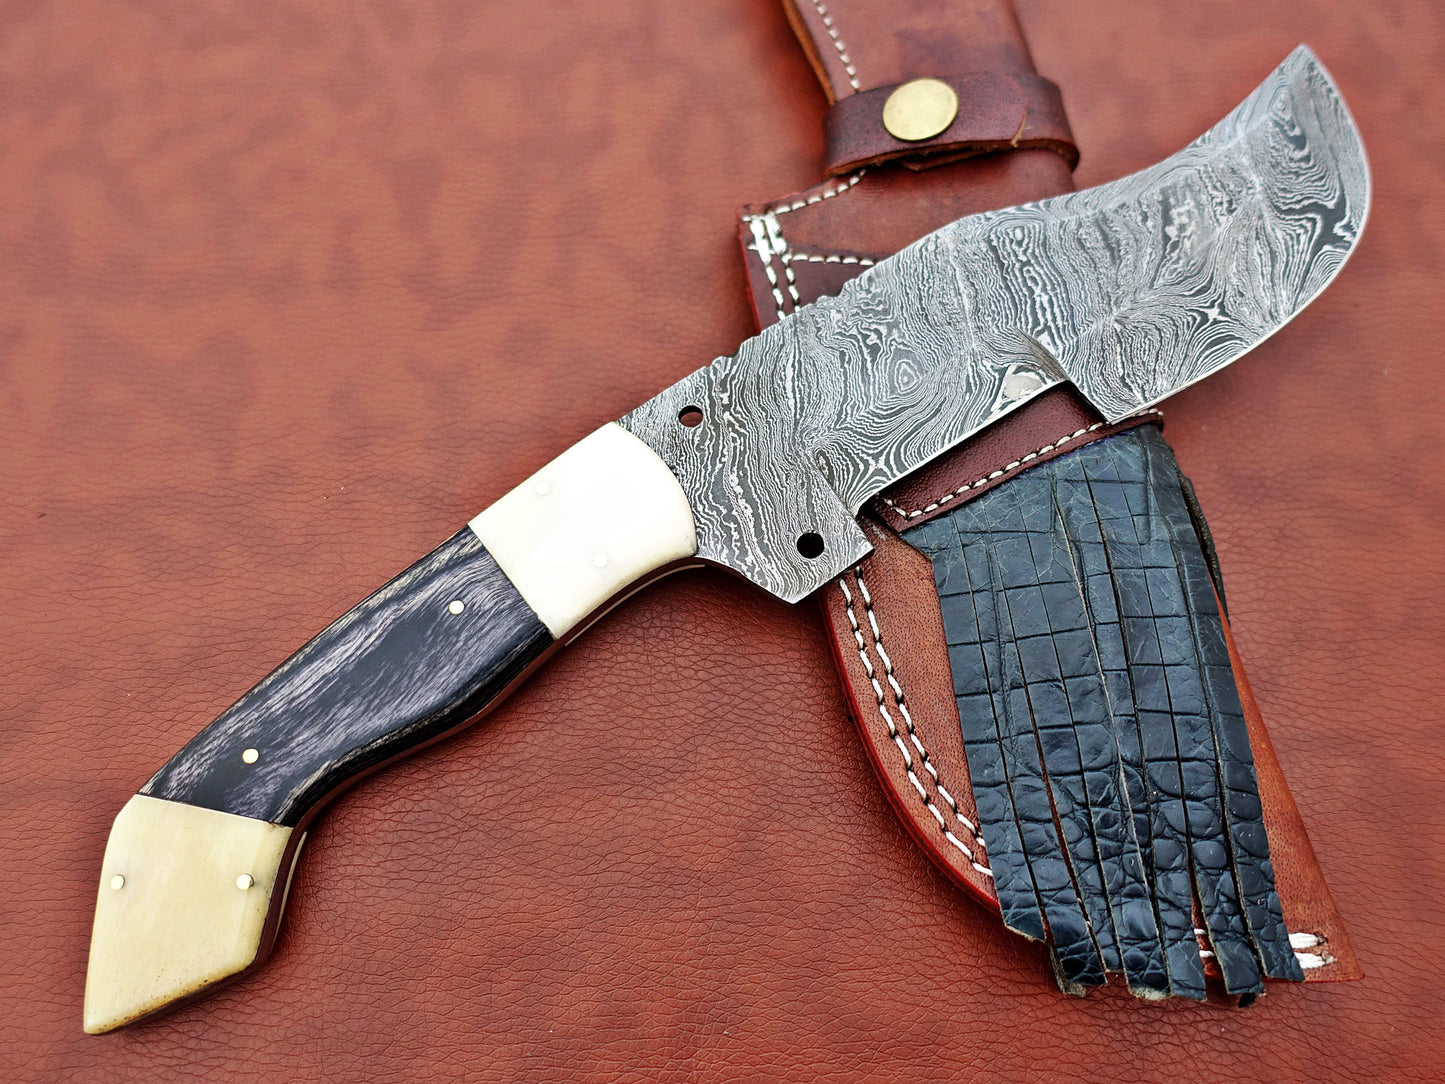 12" Long hand forged twist pattern full tang Damascus steel tracker knife, 2 tone dollar wood scale with Camel bone Bolster & pomel, Cow leather sheath